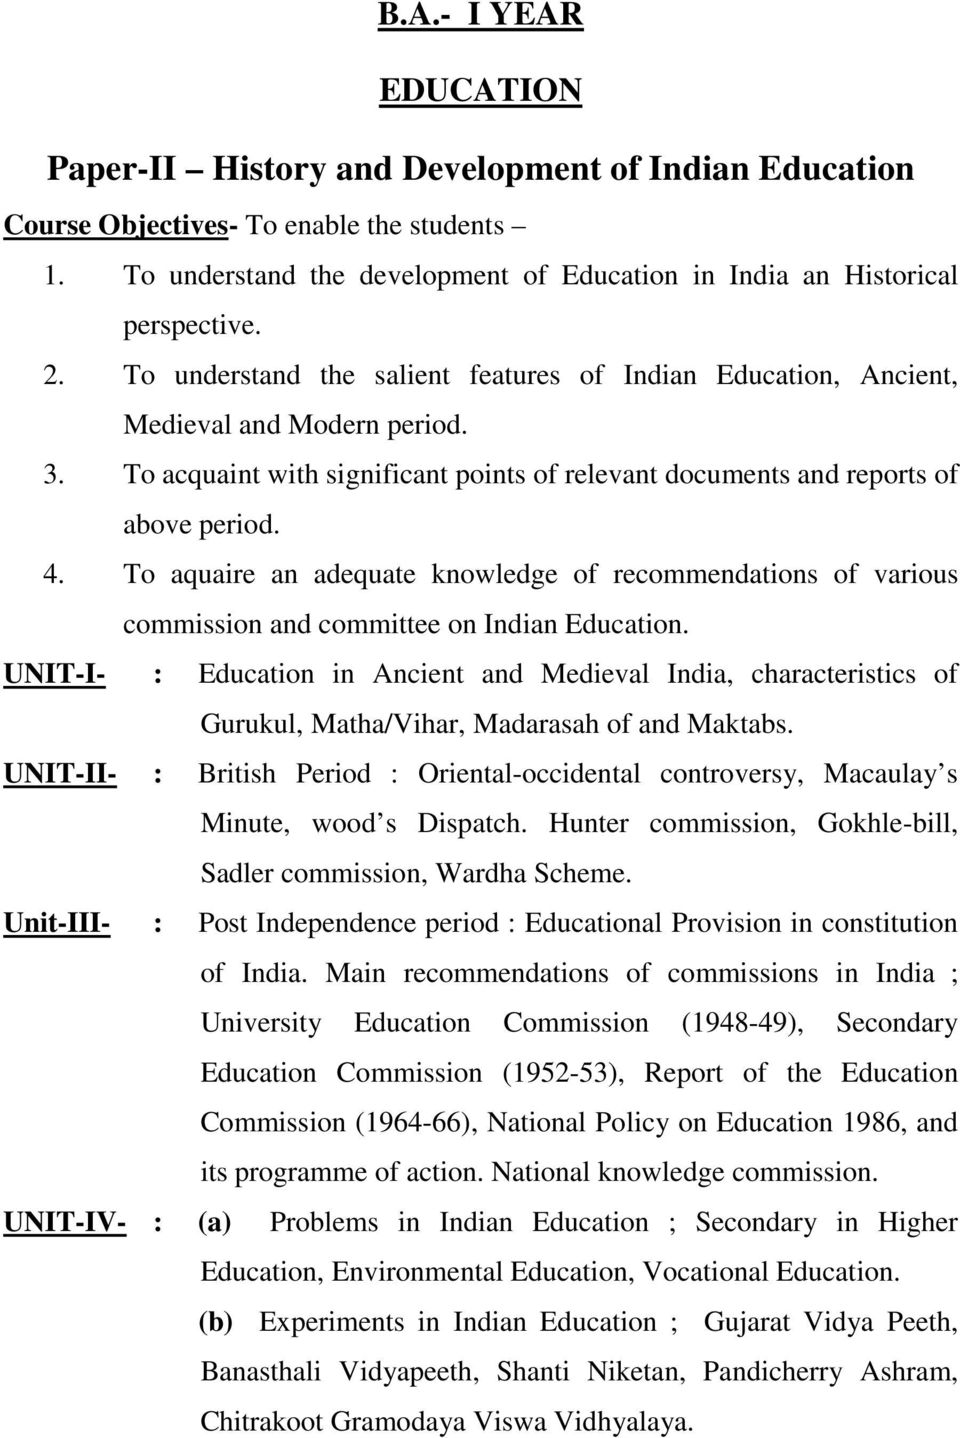 To aquaire an adequate knowledge of recommendations of various commission and committee on Indian Education.